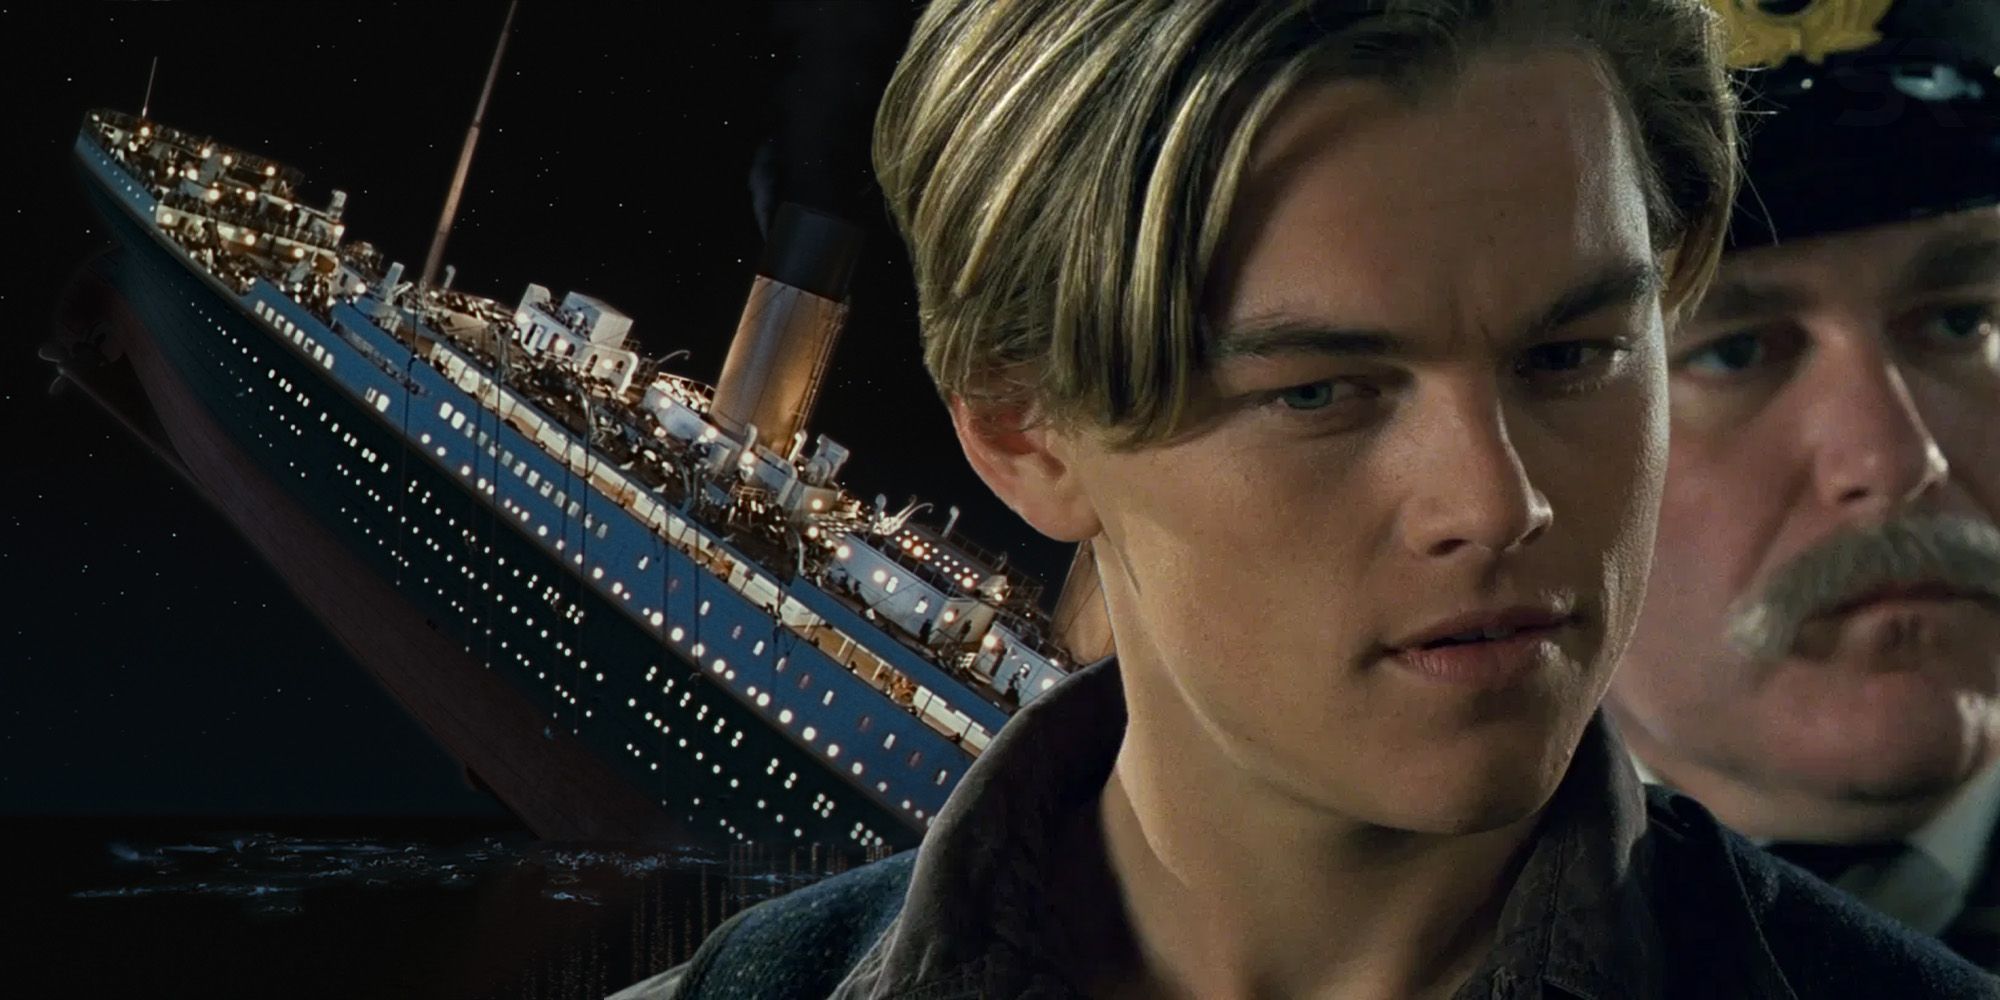 This Deleted Titanic Scene Would Have Made The Movie So Much Better